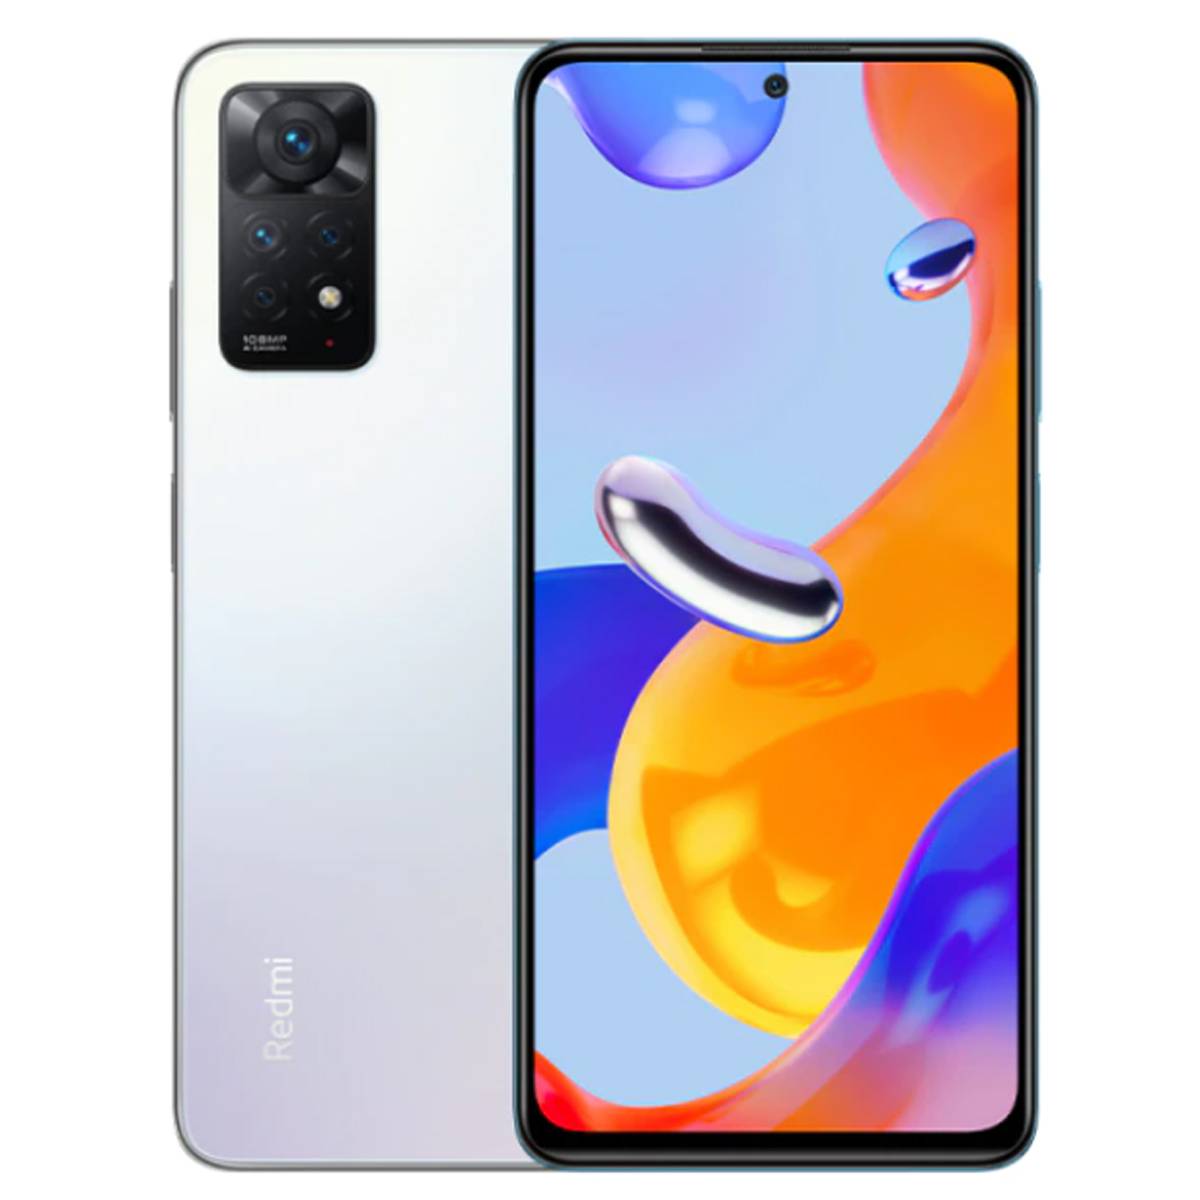 Xiaomi Redmi Note 11 Pro Specs and Features